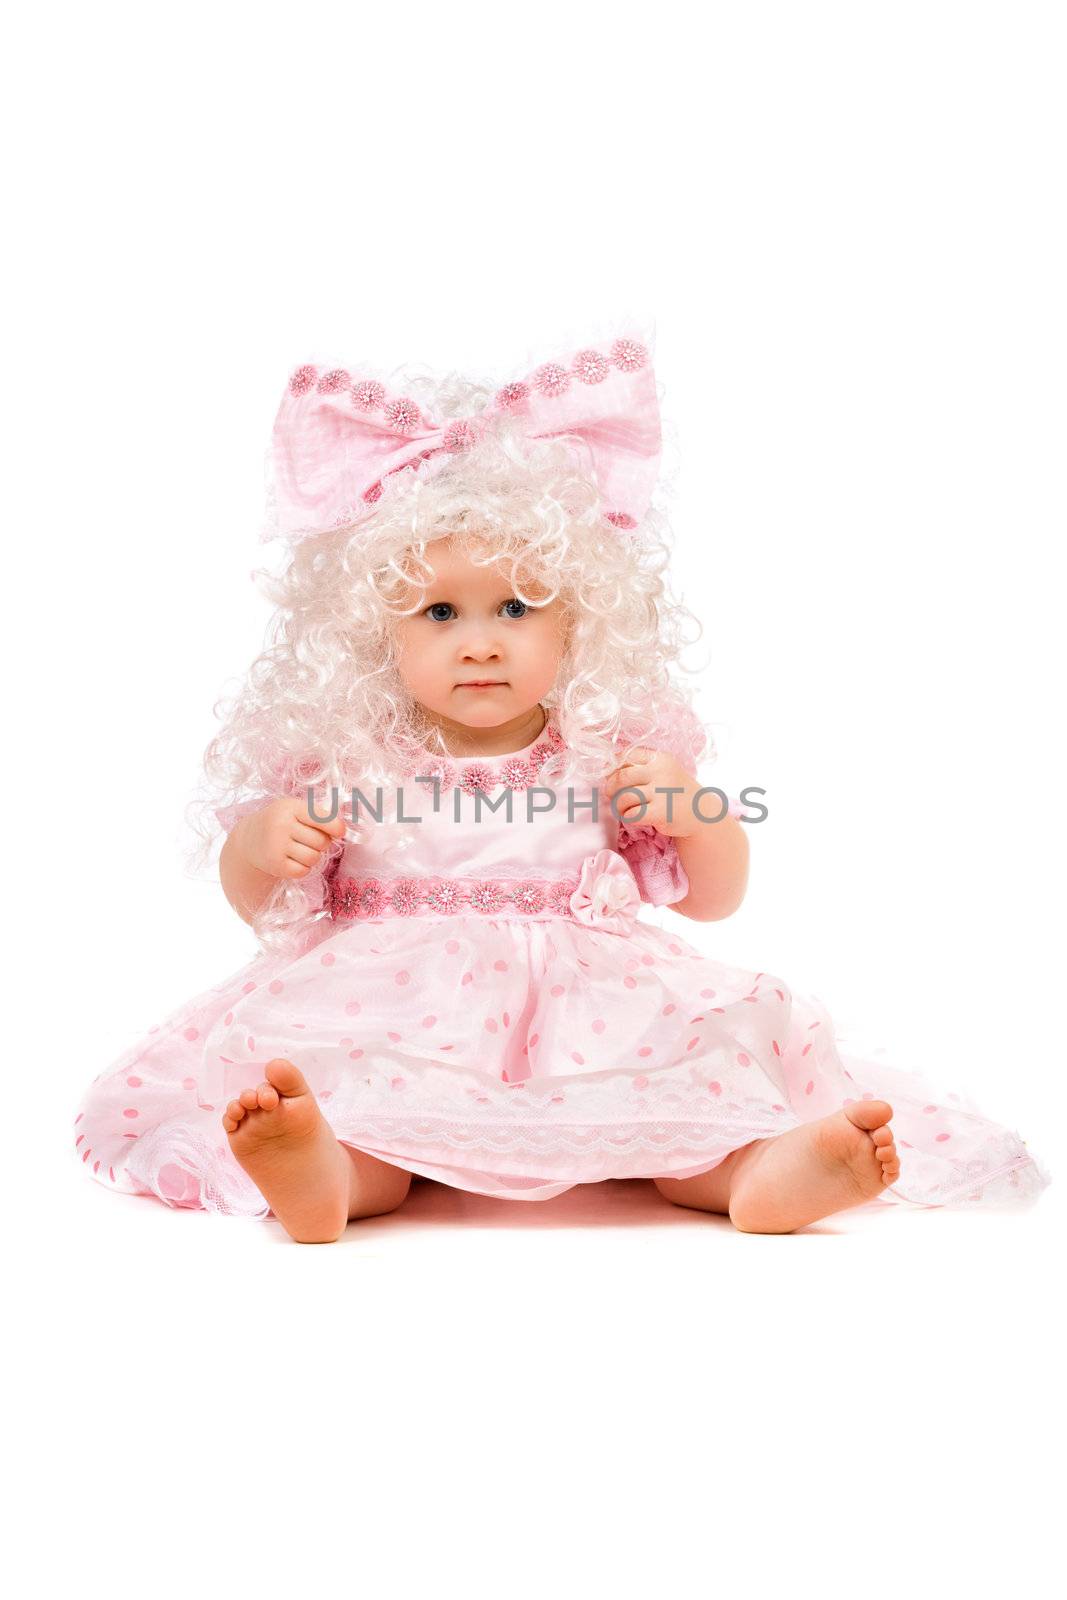 Beautiful baby girl in a pink dress